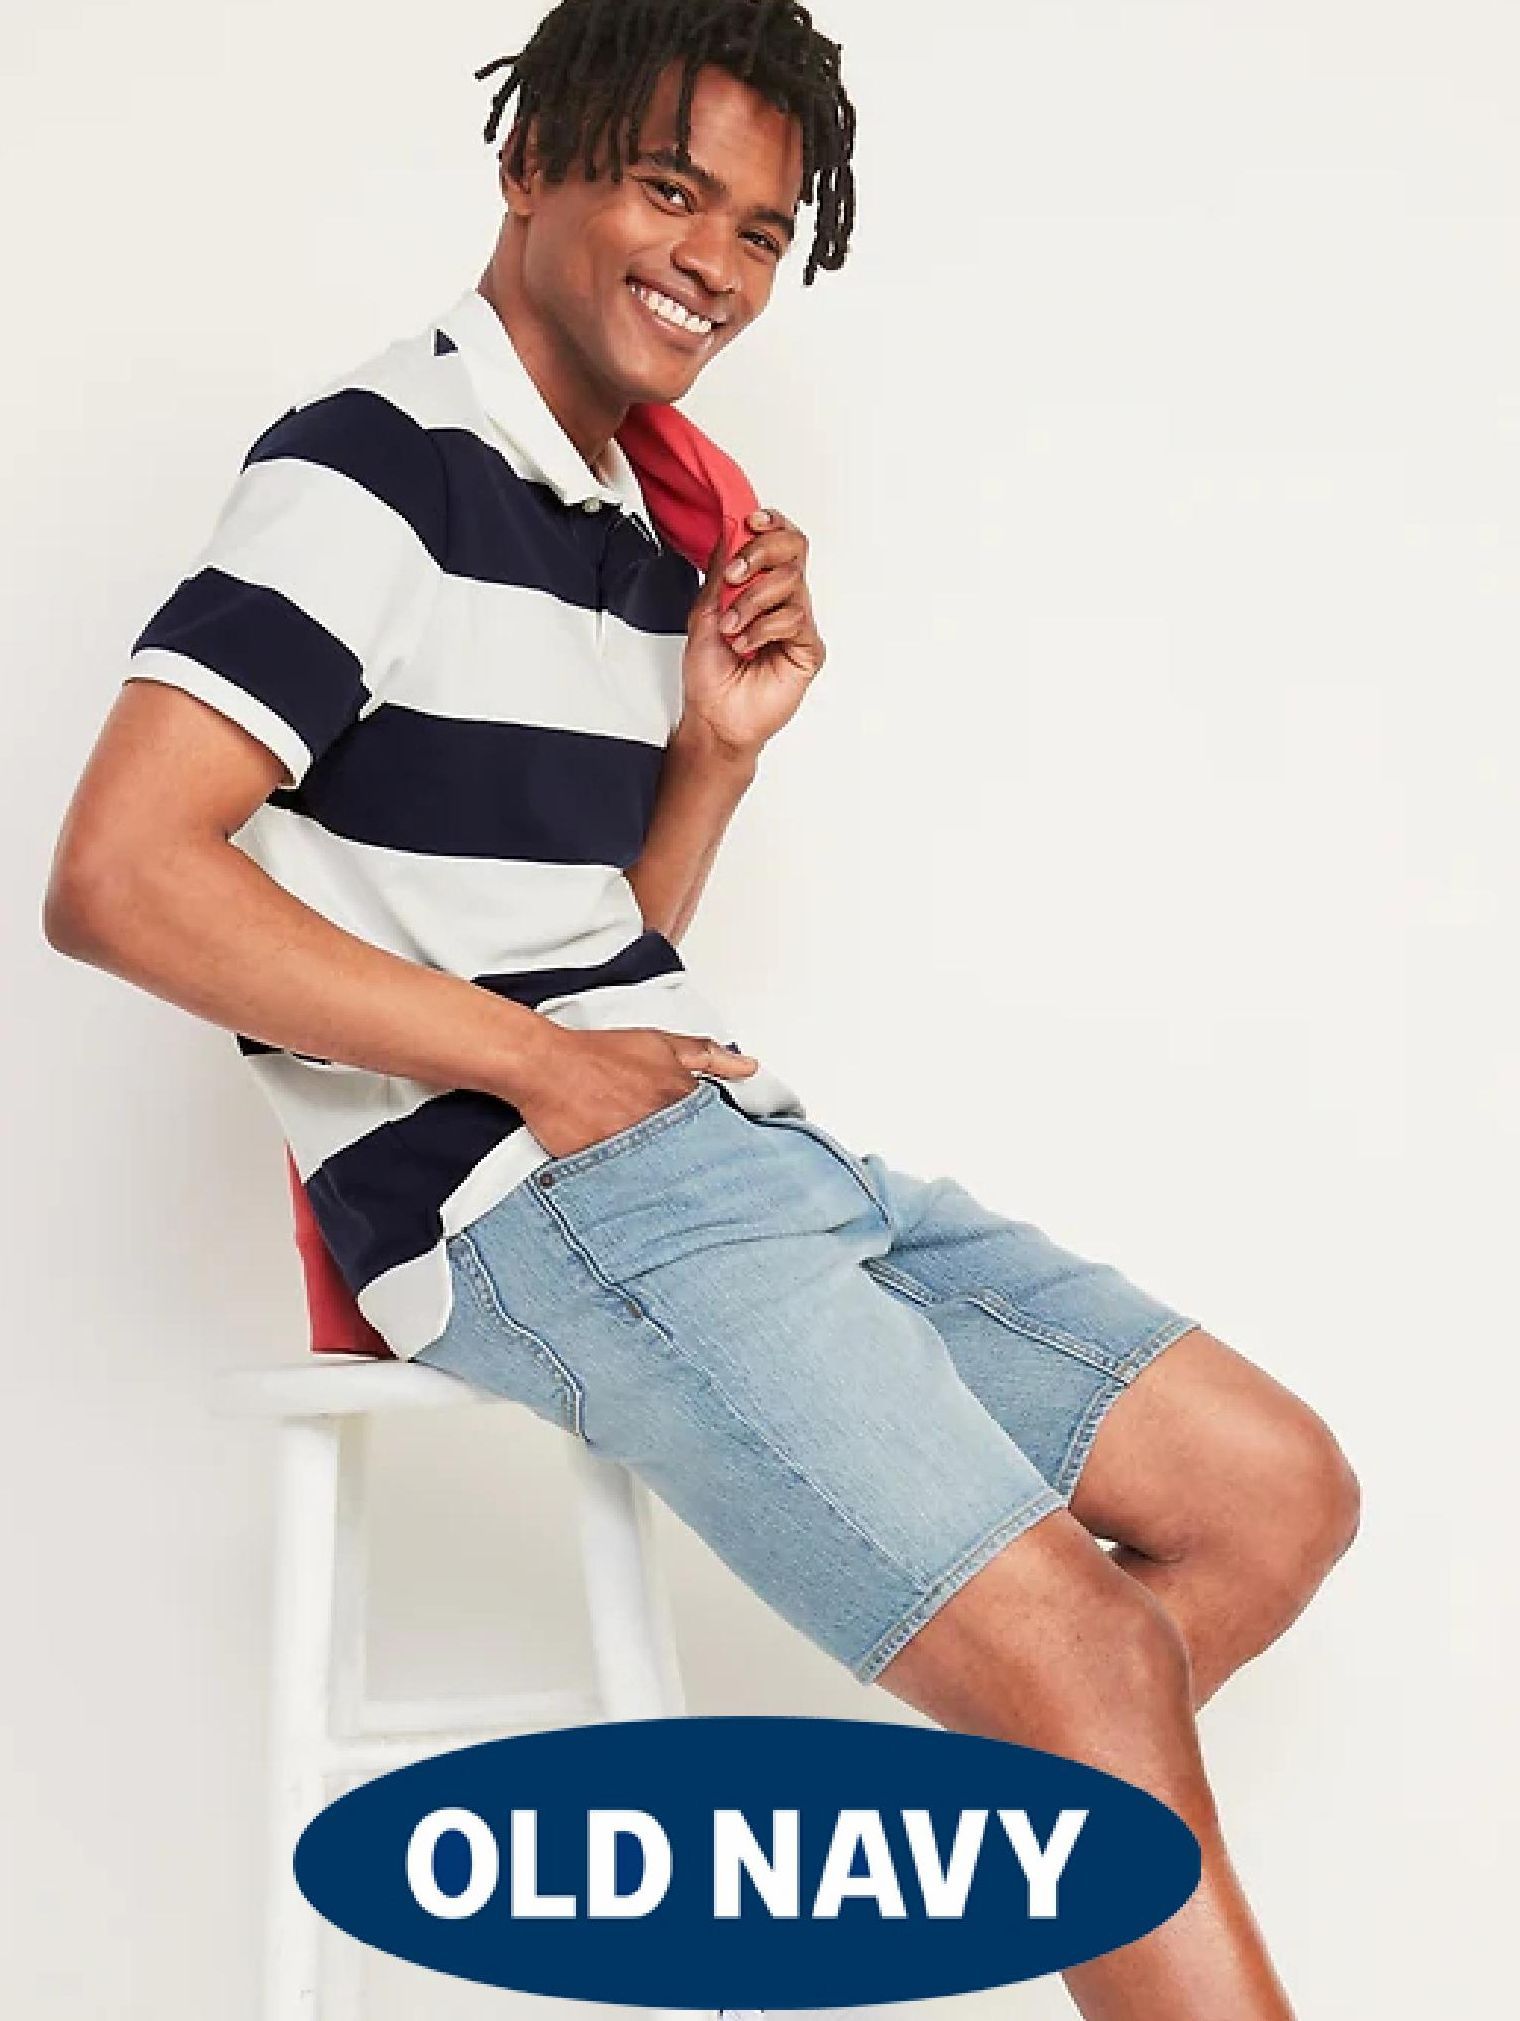 Season offers in Old Navy